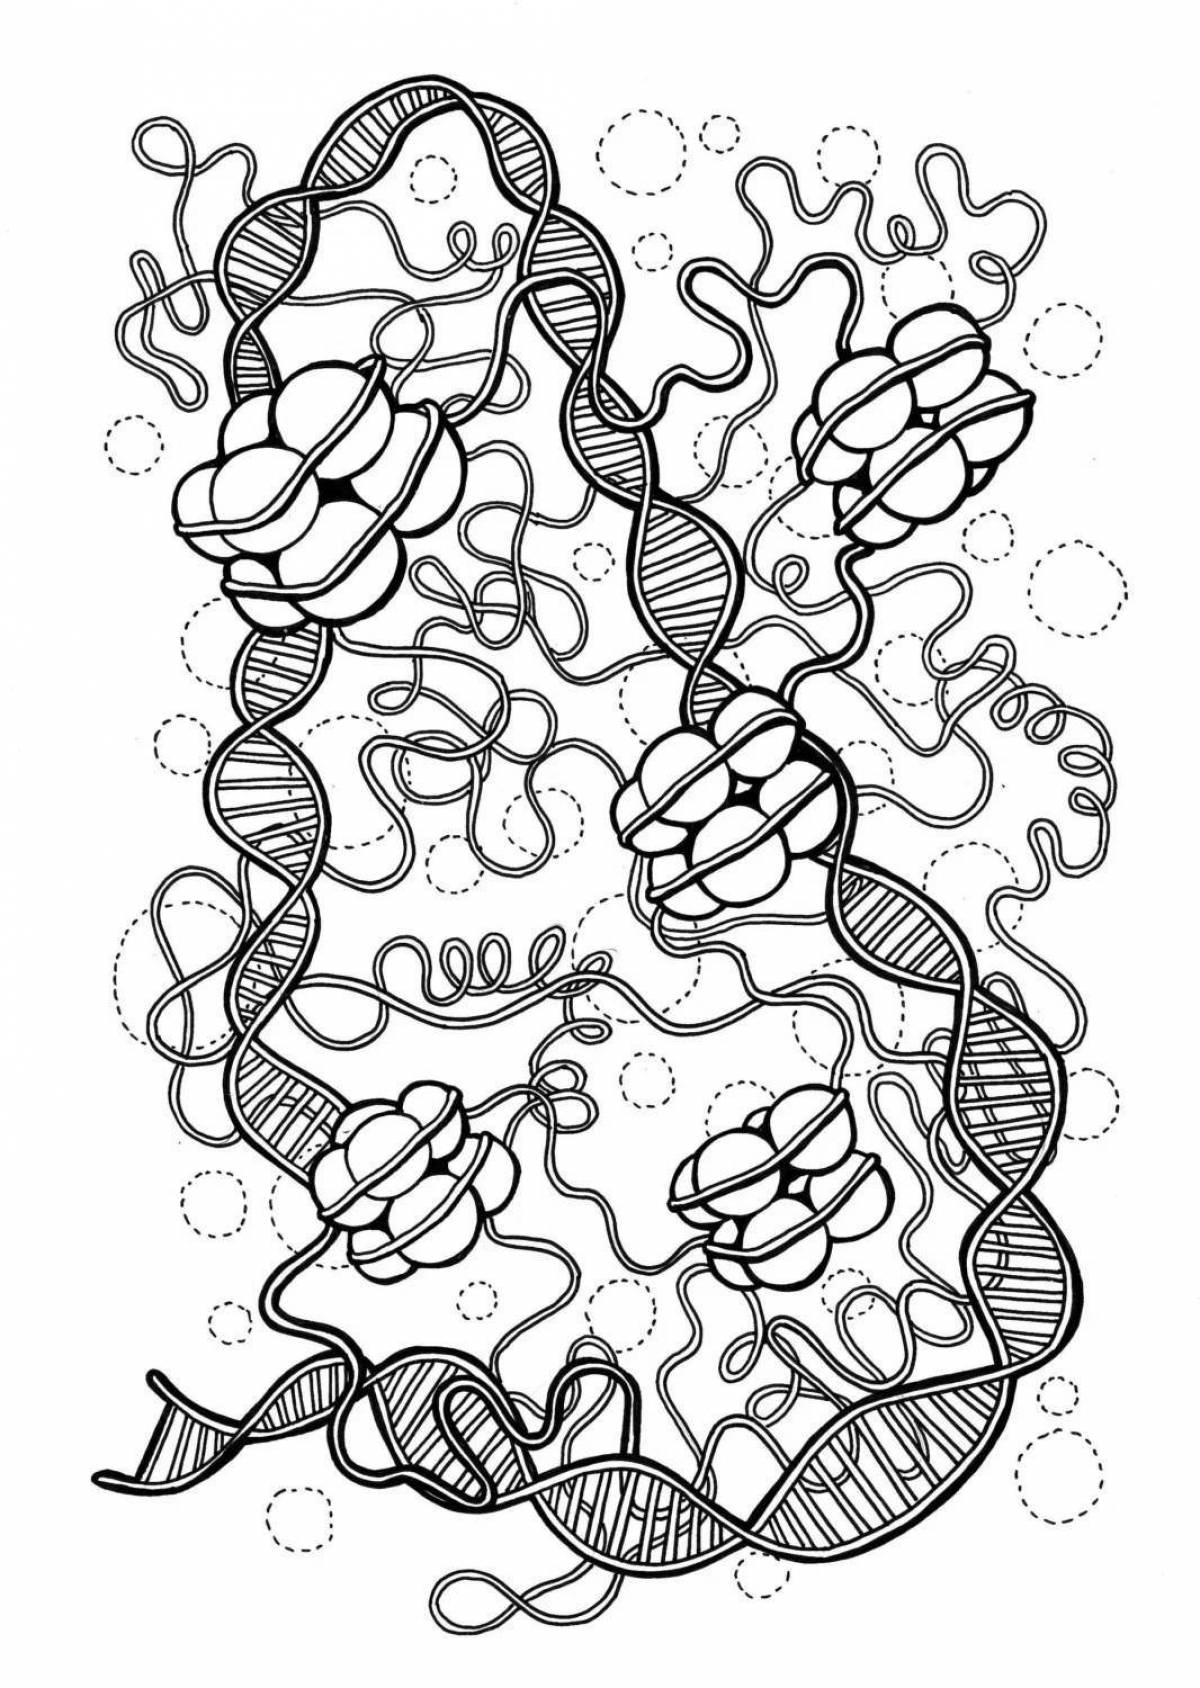 Creative dna coloring page